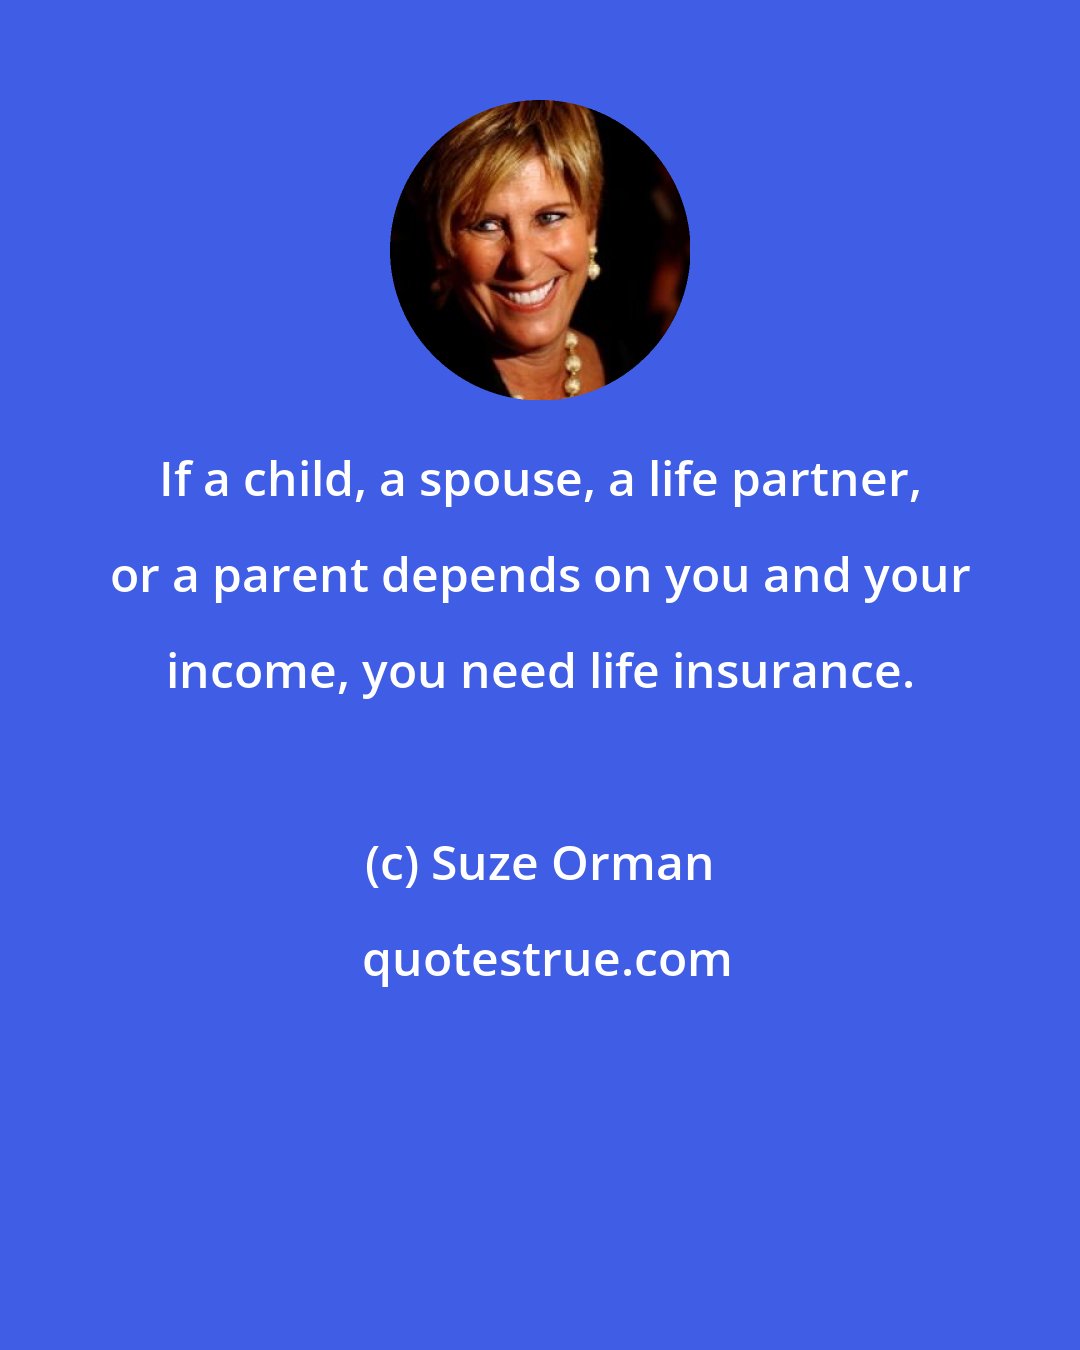 Suze Orman: If a child, a spouse, a life partner, or a parent depends on you and your income, you need life insurance.